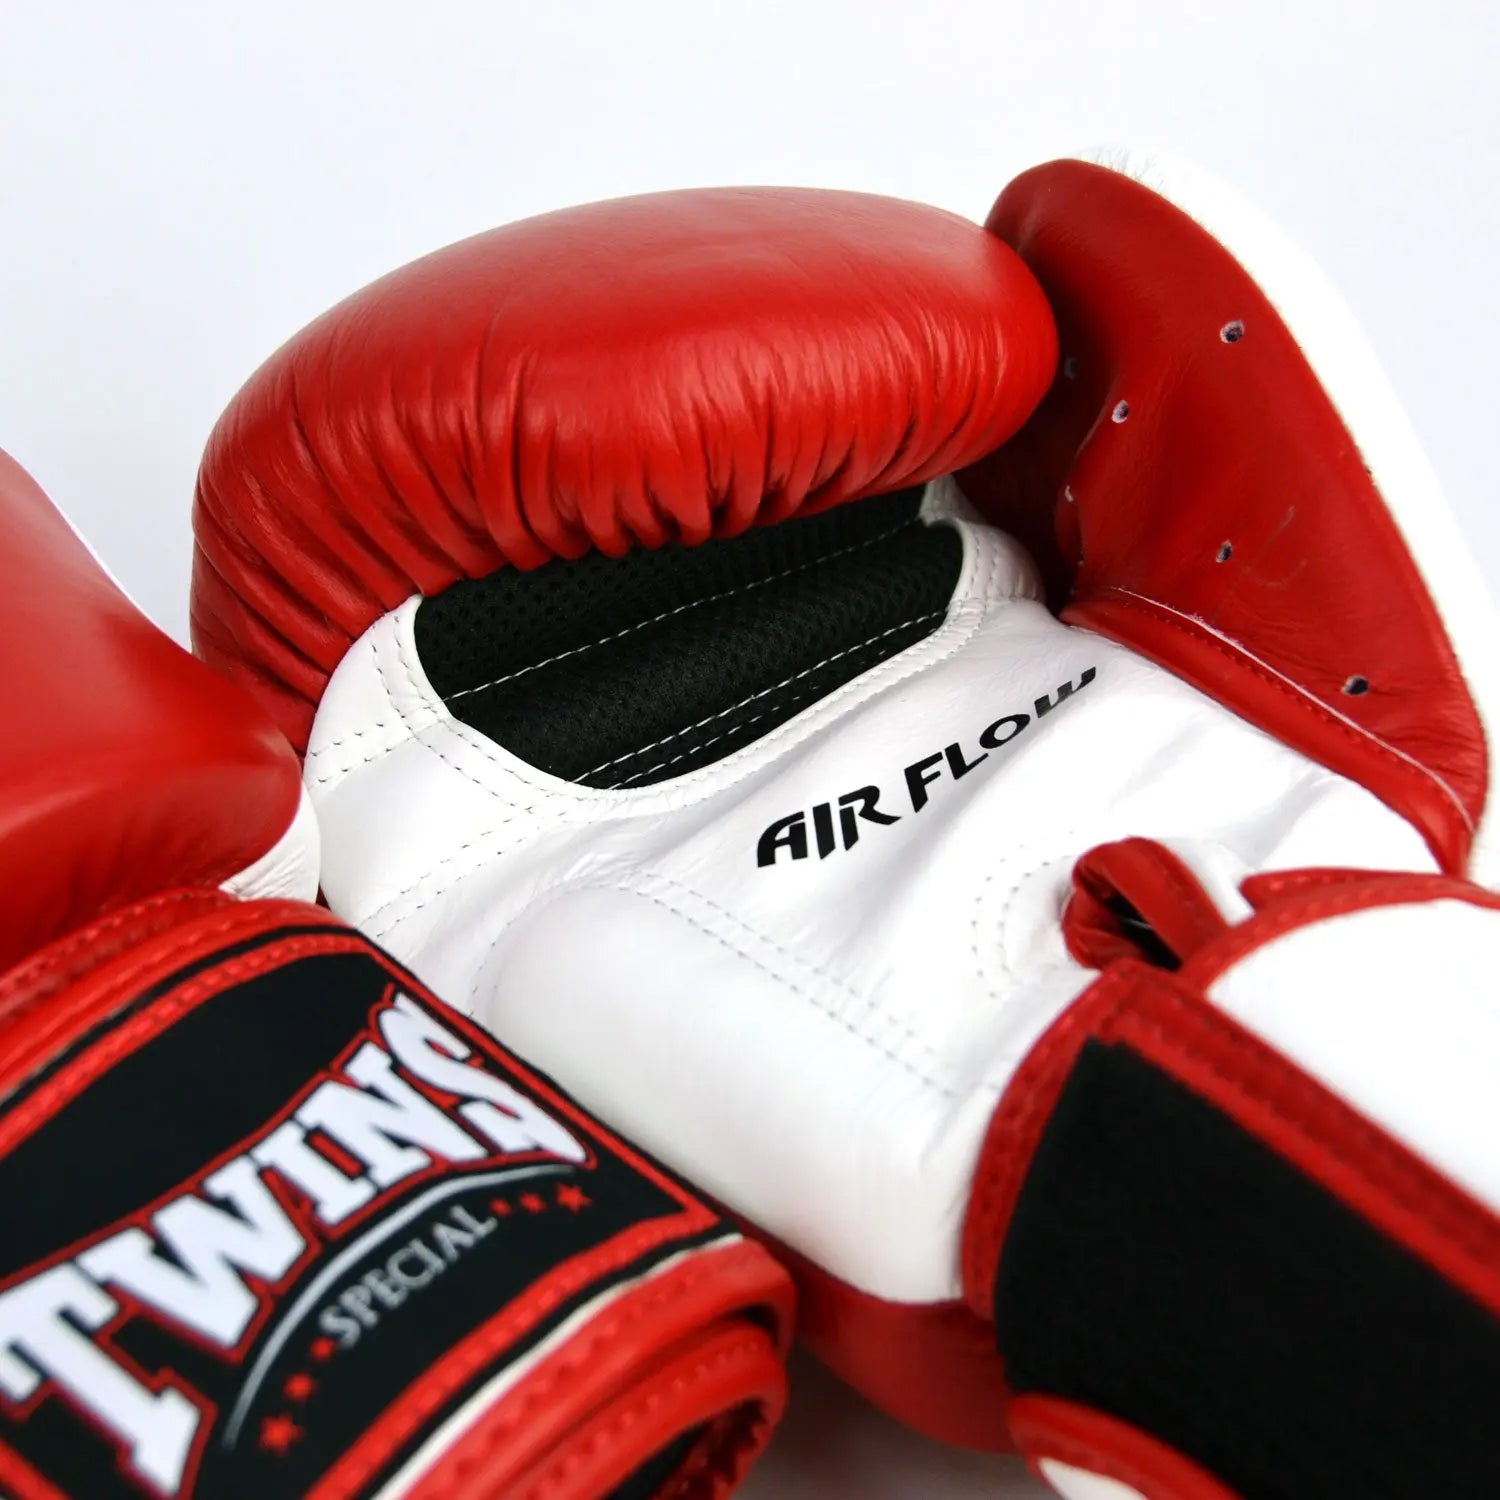 Twins Special Air Flow Boxing Gloves Twins Special